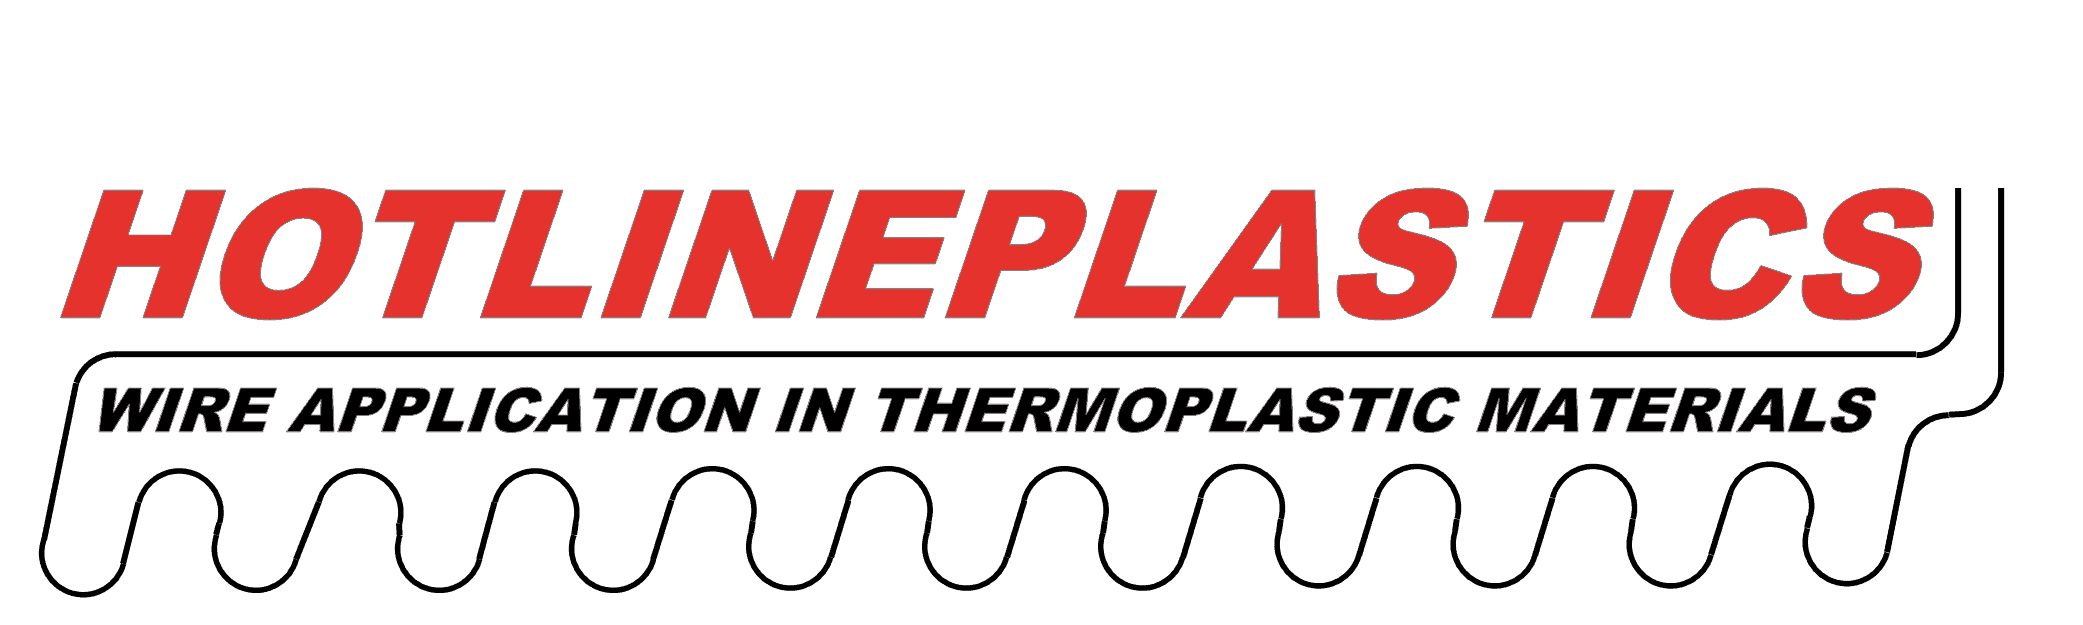 Hotlineplastics GmbH - Wire application in thermoplastic materials